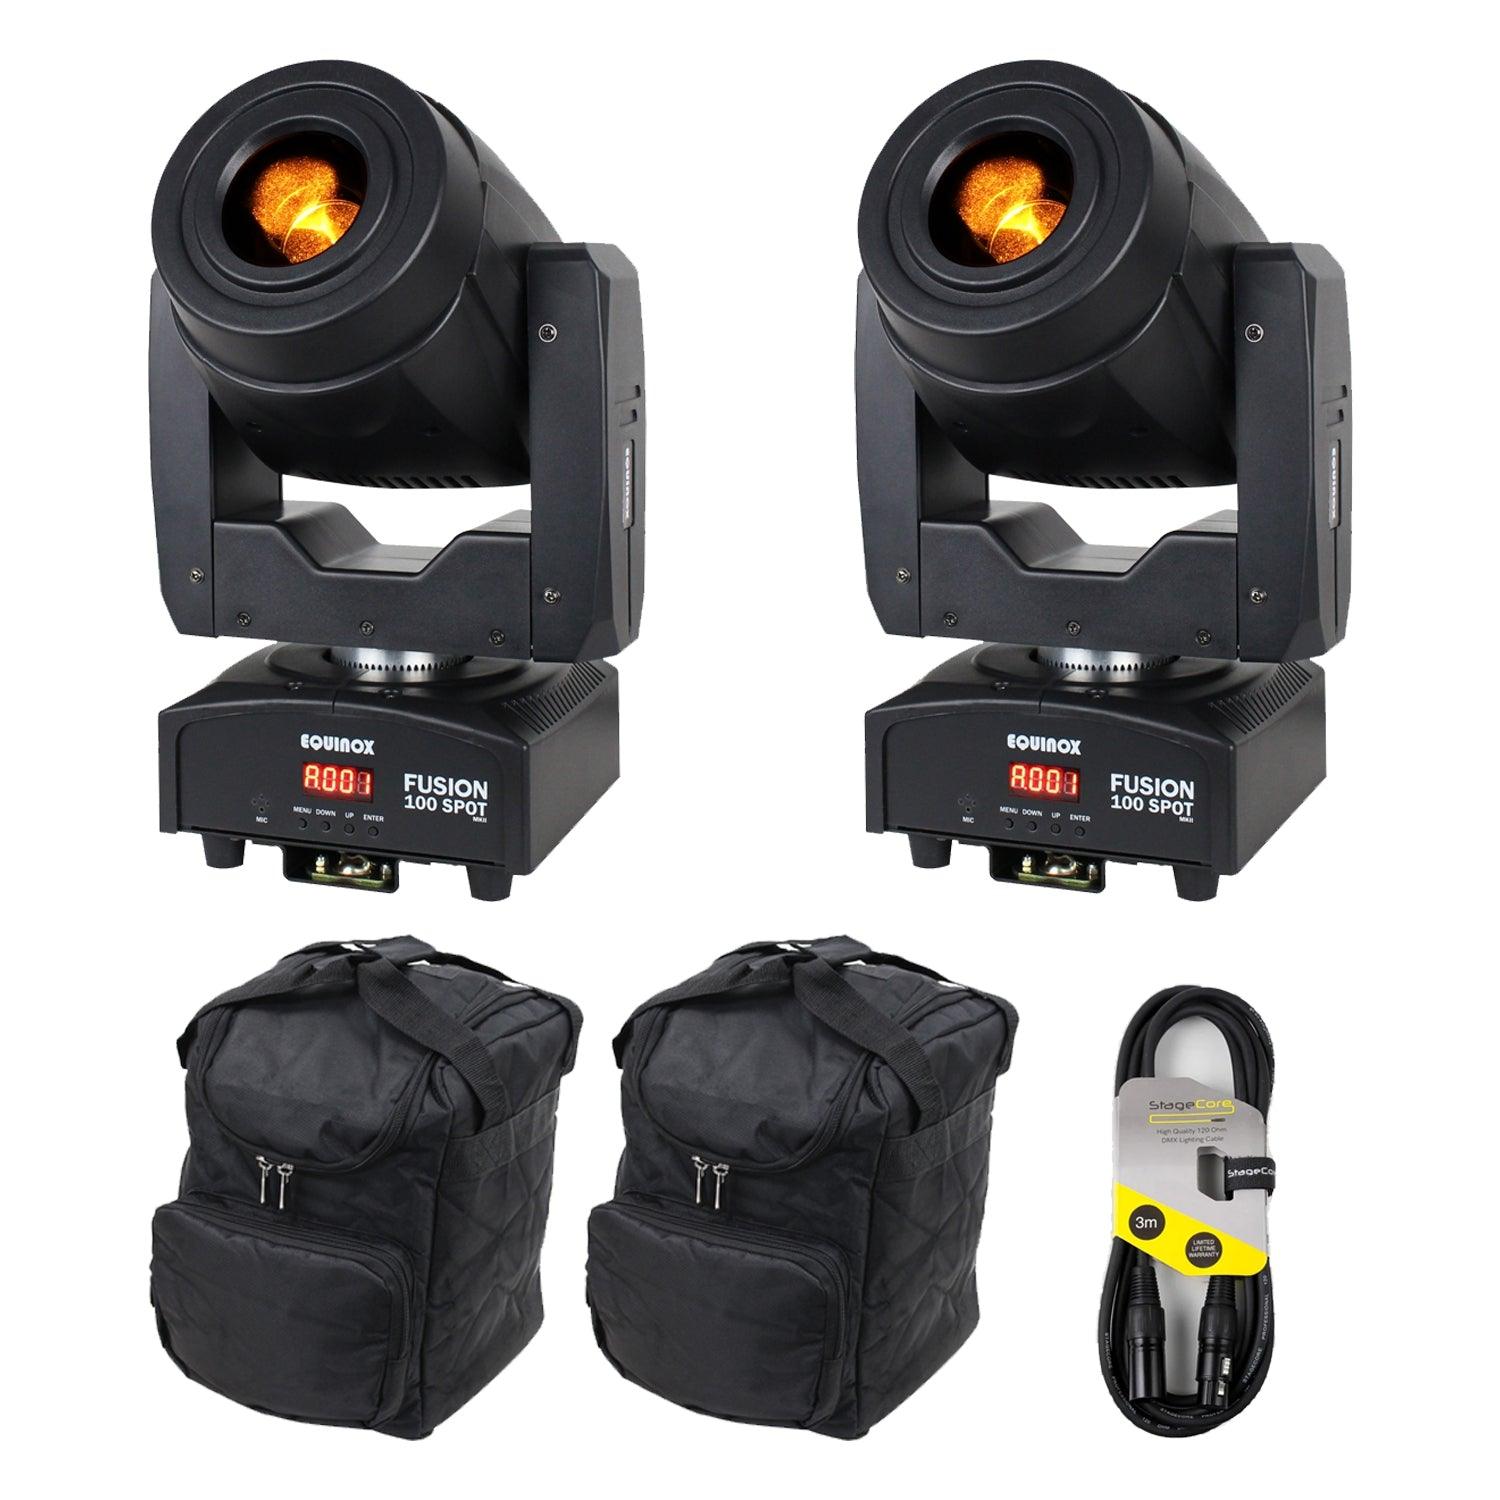 2 x Equinox Fusion 100 Spot MKII Moving Head with Carry Bag & Cables - DY Pro Audio